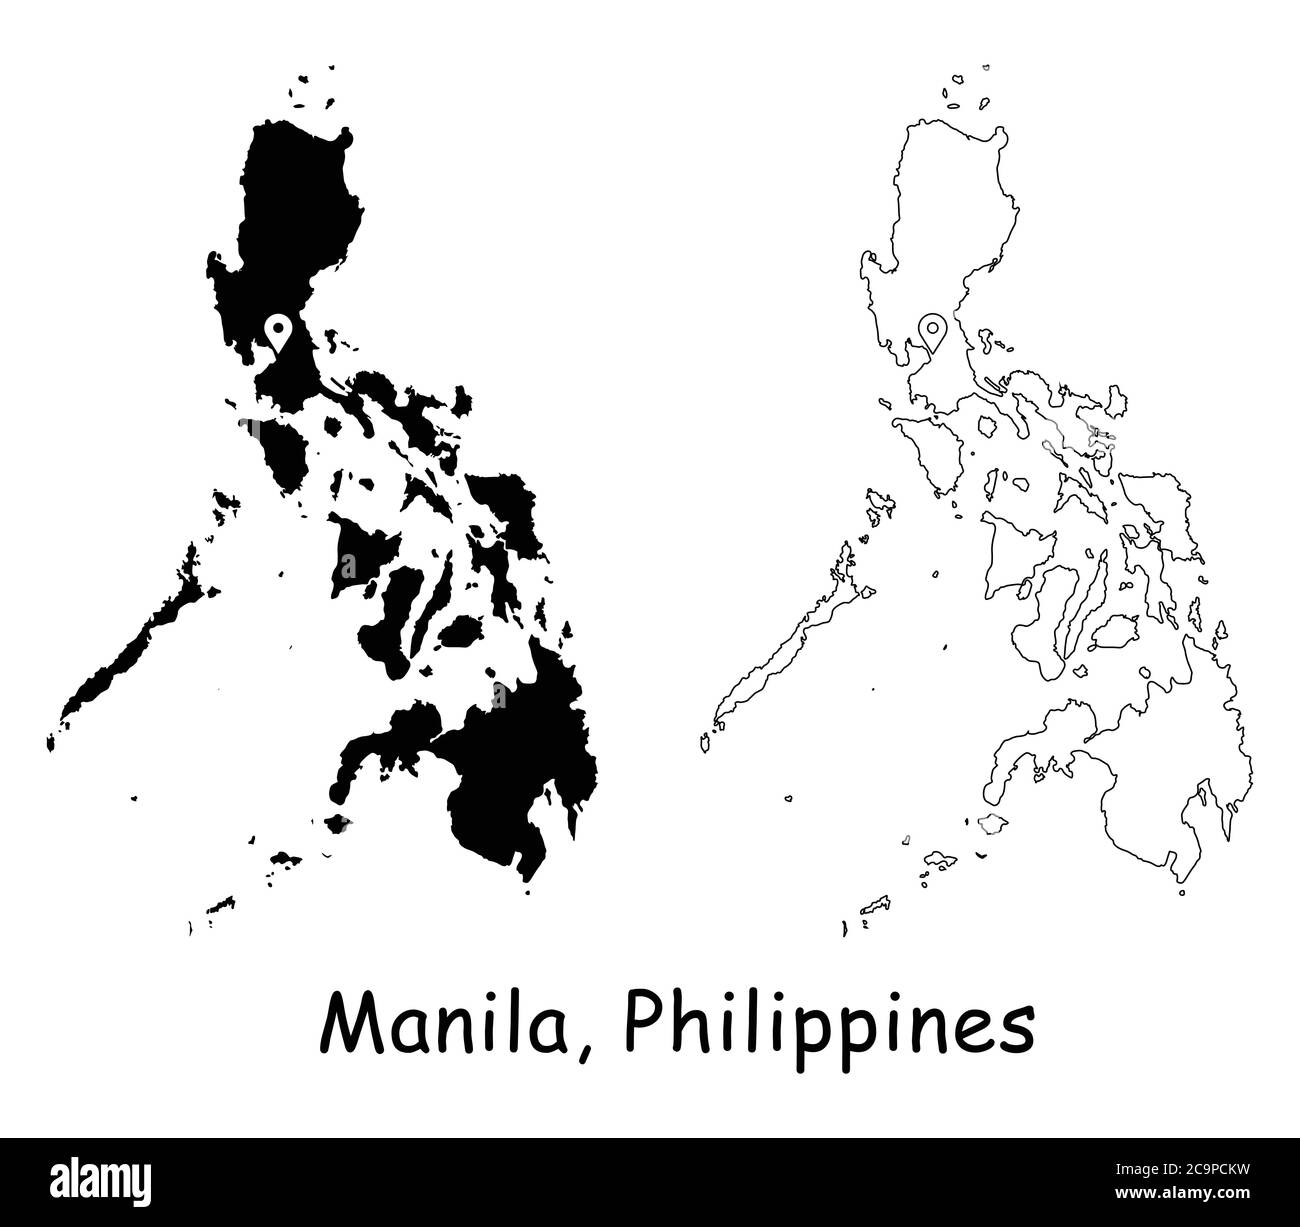 the philippines map black and white stock photos images alamy https www alamy com manila philippines detailed country map with location pin on capital city black silhouette and outline maps isolated on white background eps vecto image367442541 html